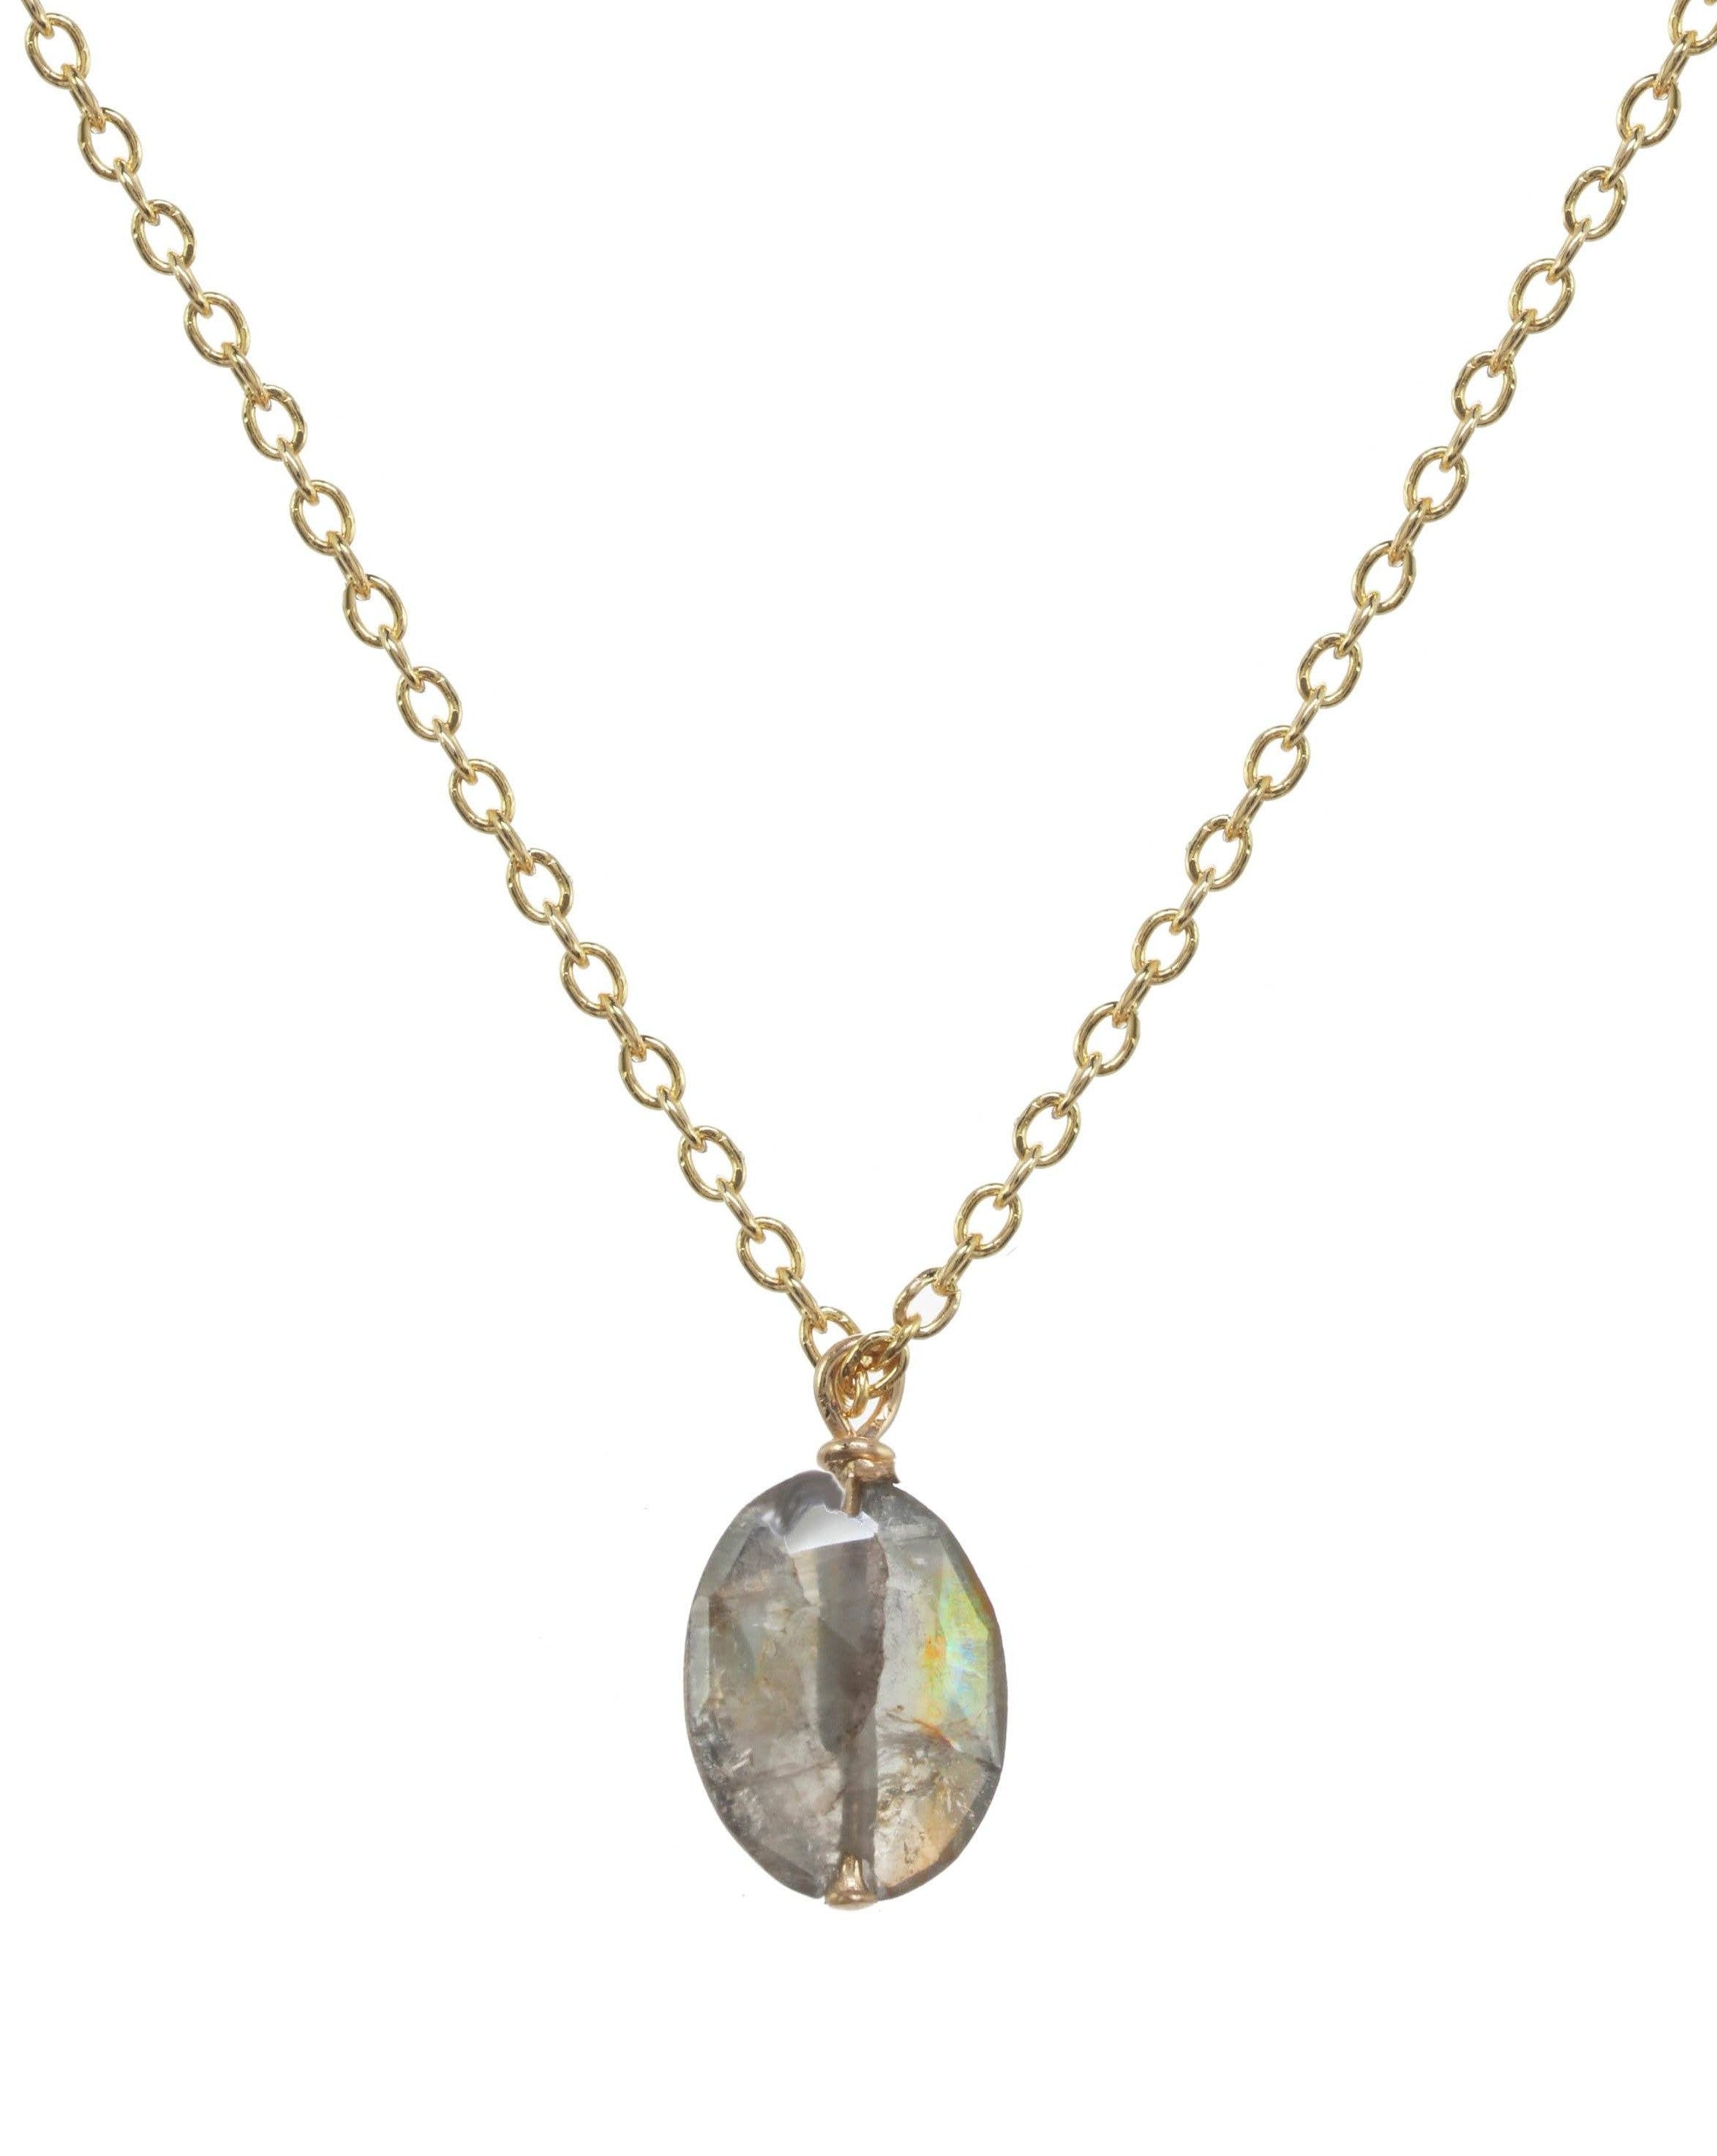 Dia Necklace by KOZAKH. A 16 to 18 inch adjustable length necklace in 14K Gold Filled, featuring a faceted Sapphire.